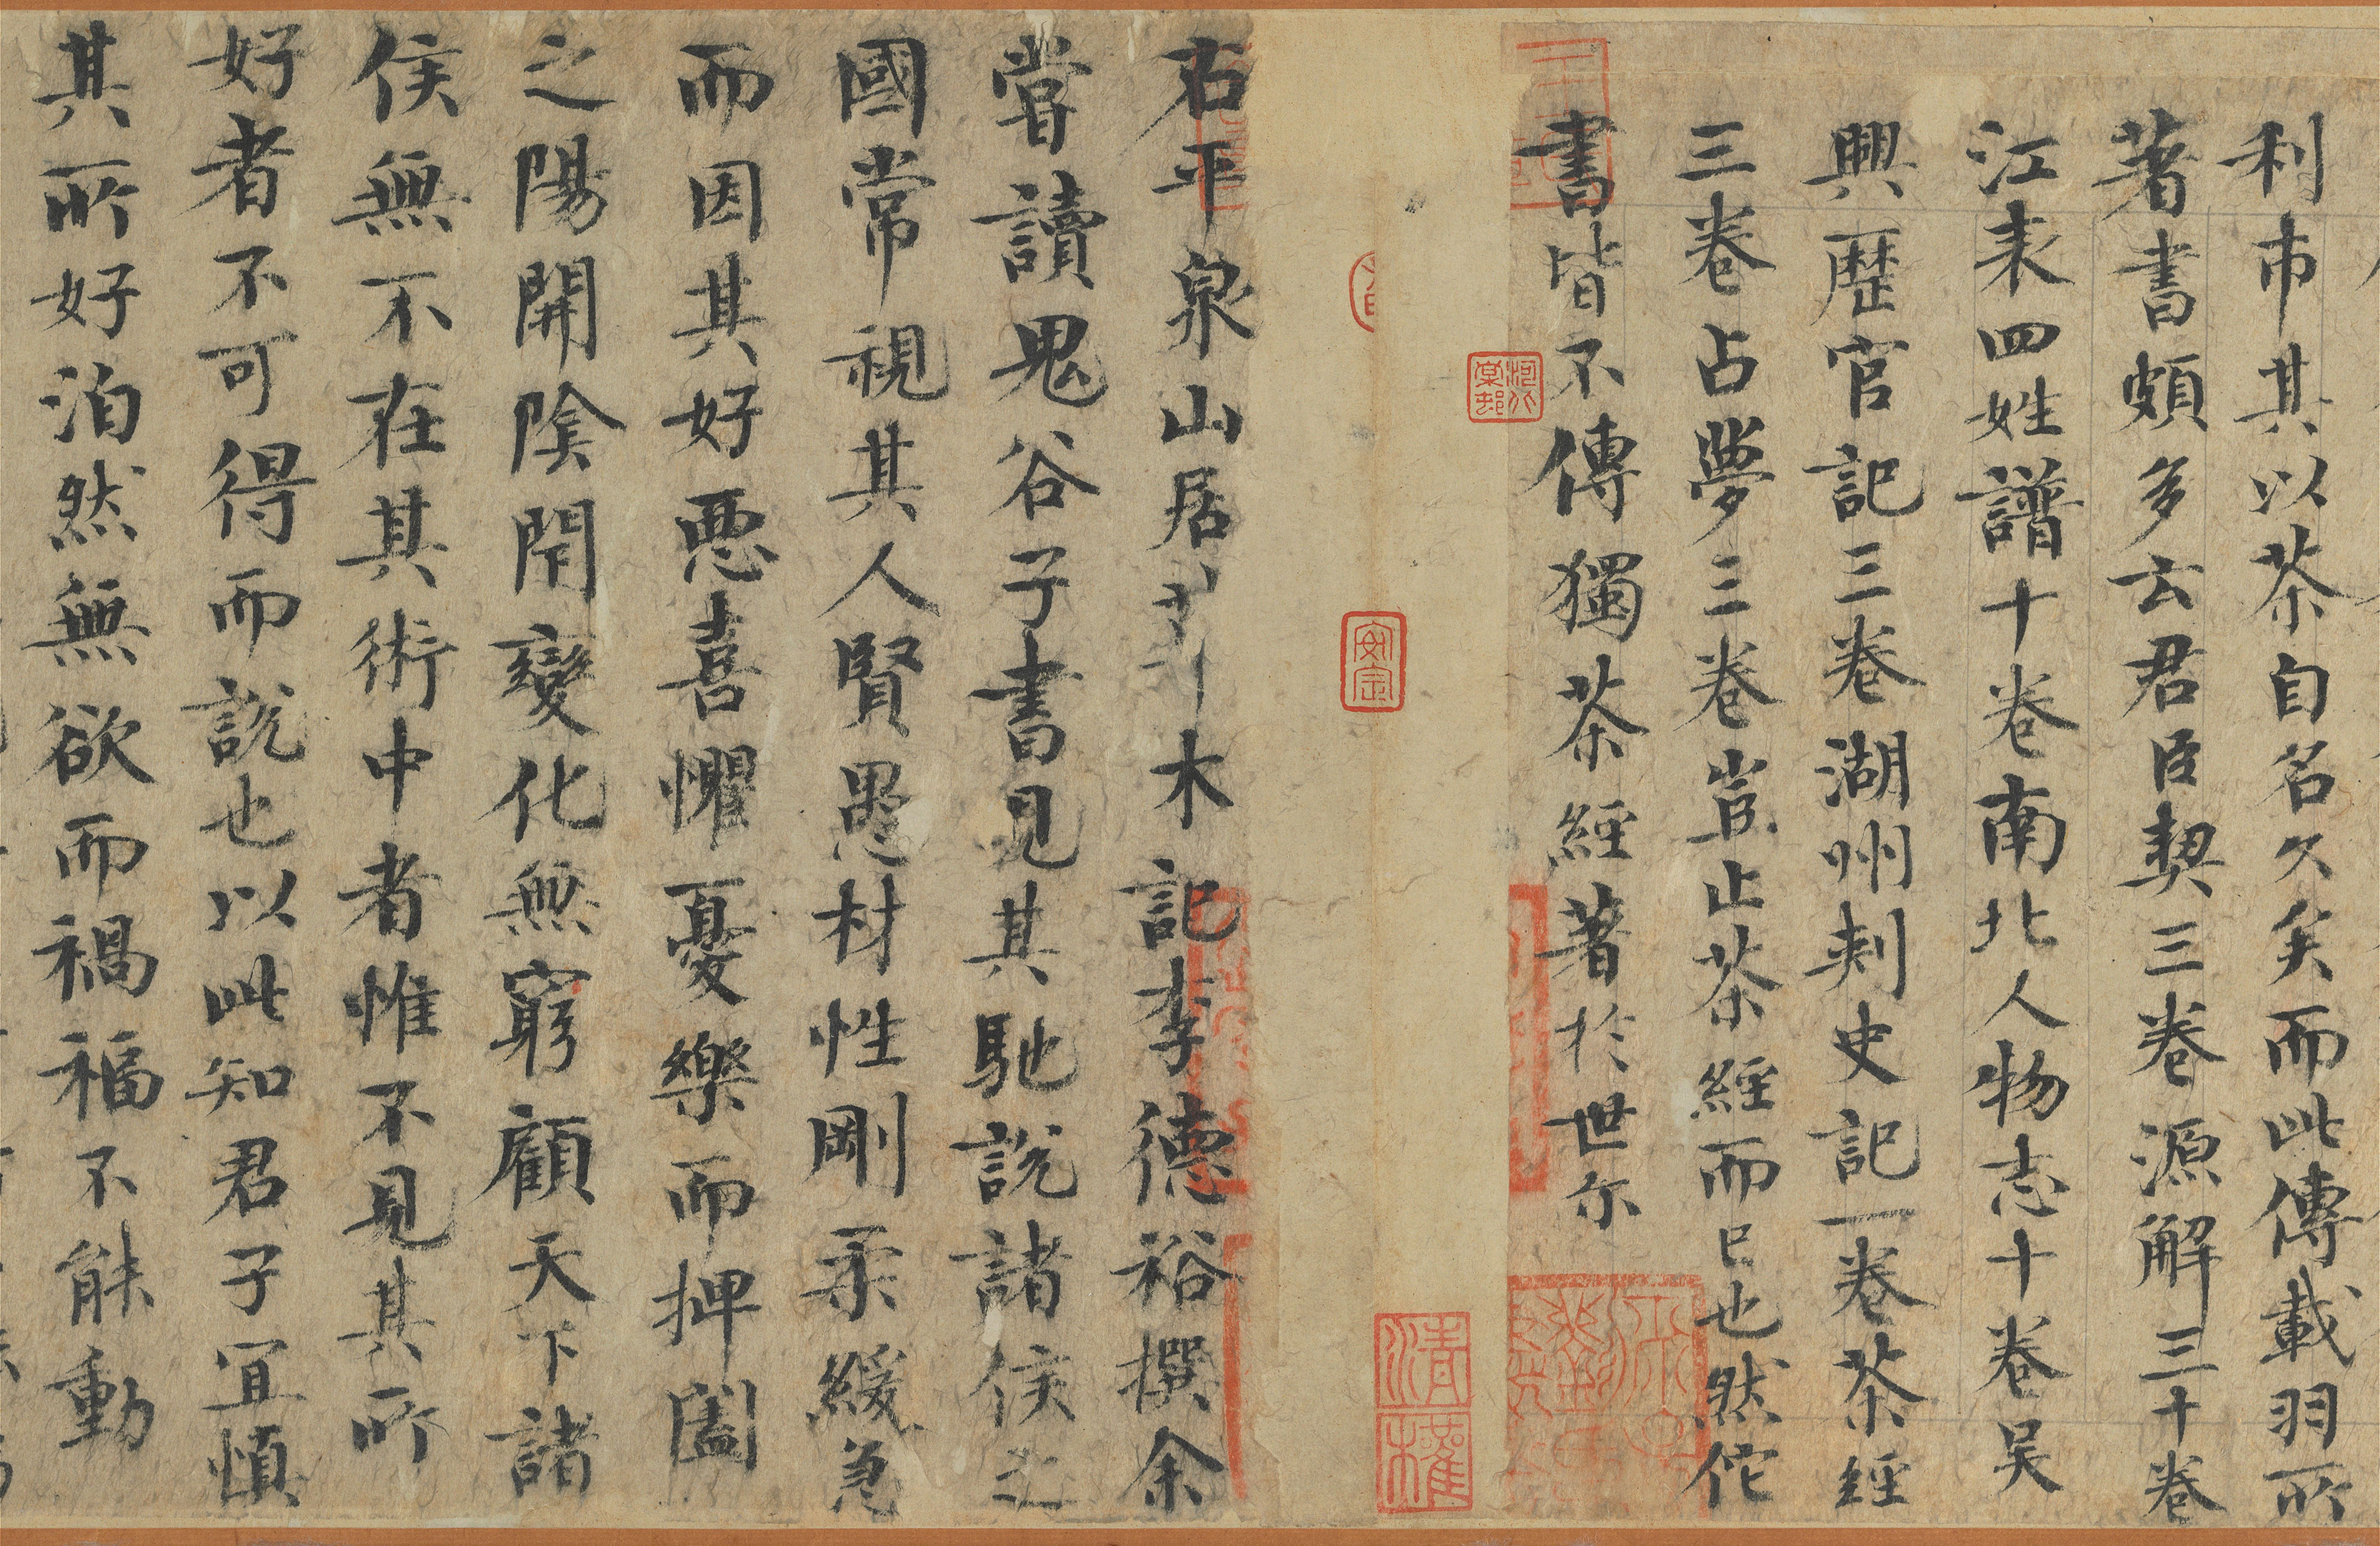 Colophon to Collected Ancient Inscriptions Ouyang Hsiu, Song dynasty